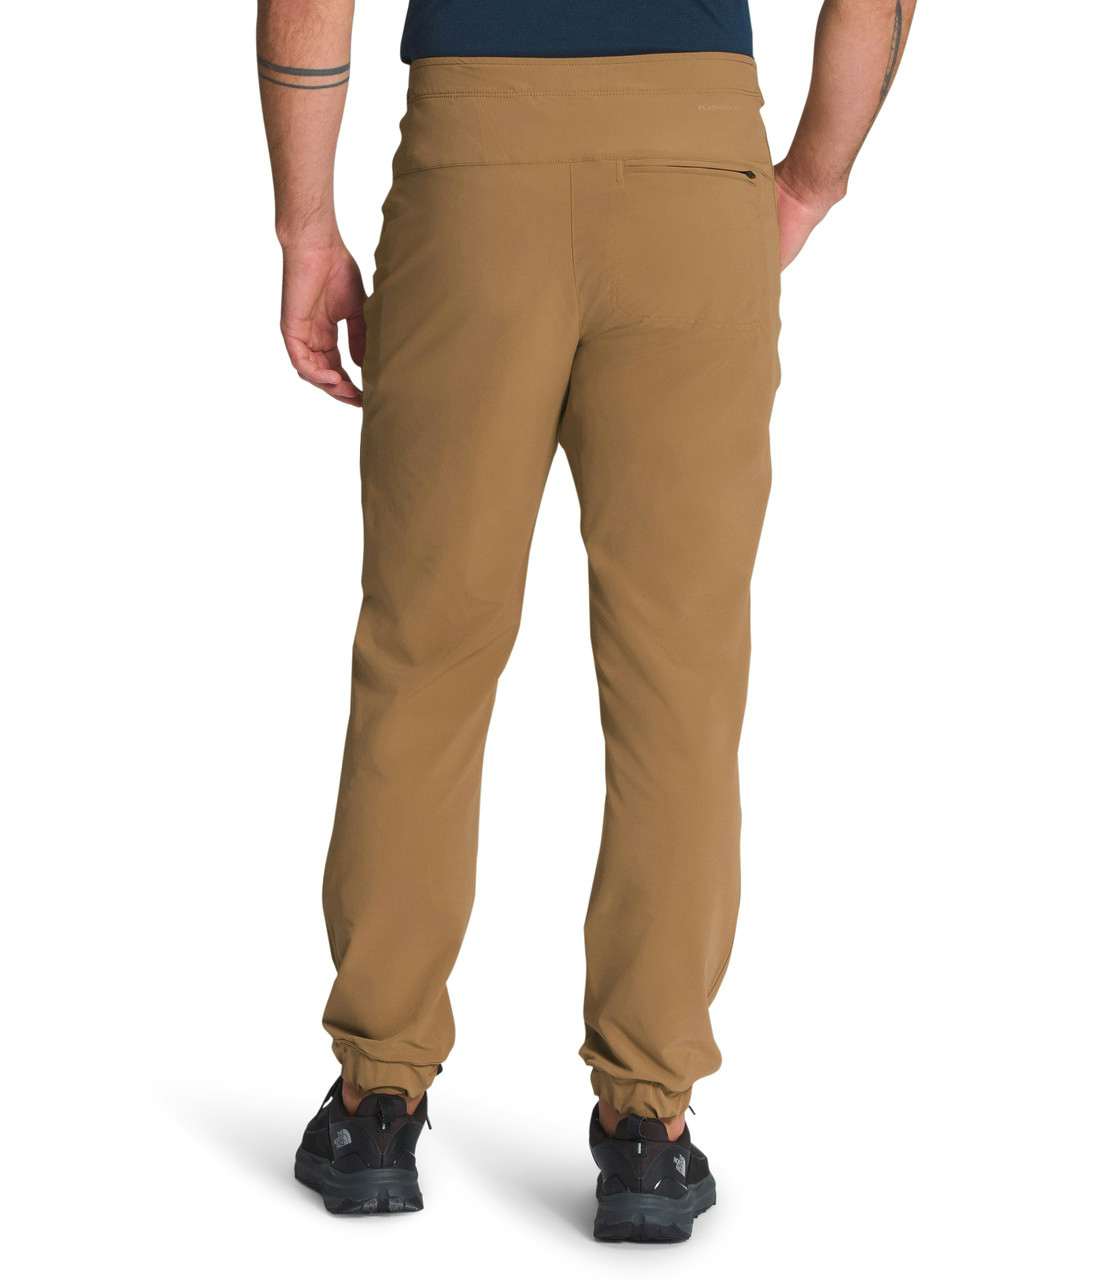 Paramount Pro Joggers Utility Brown